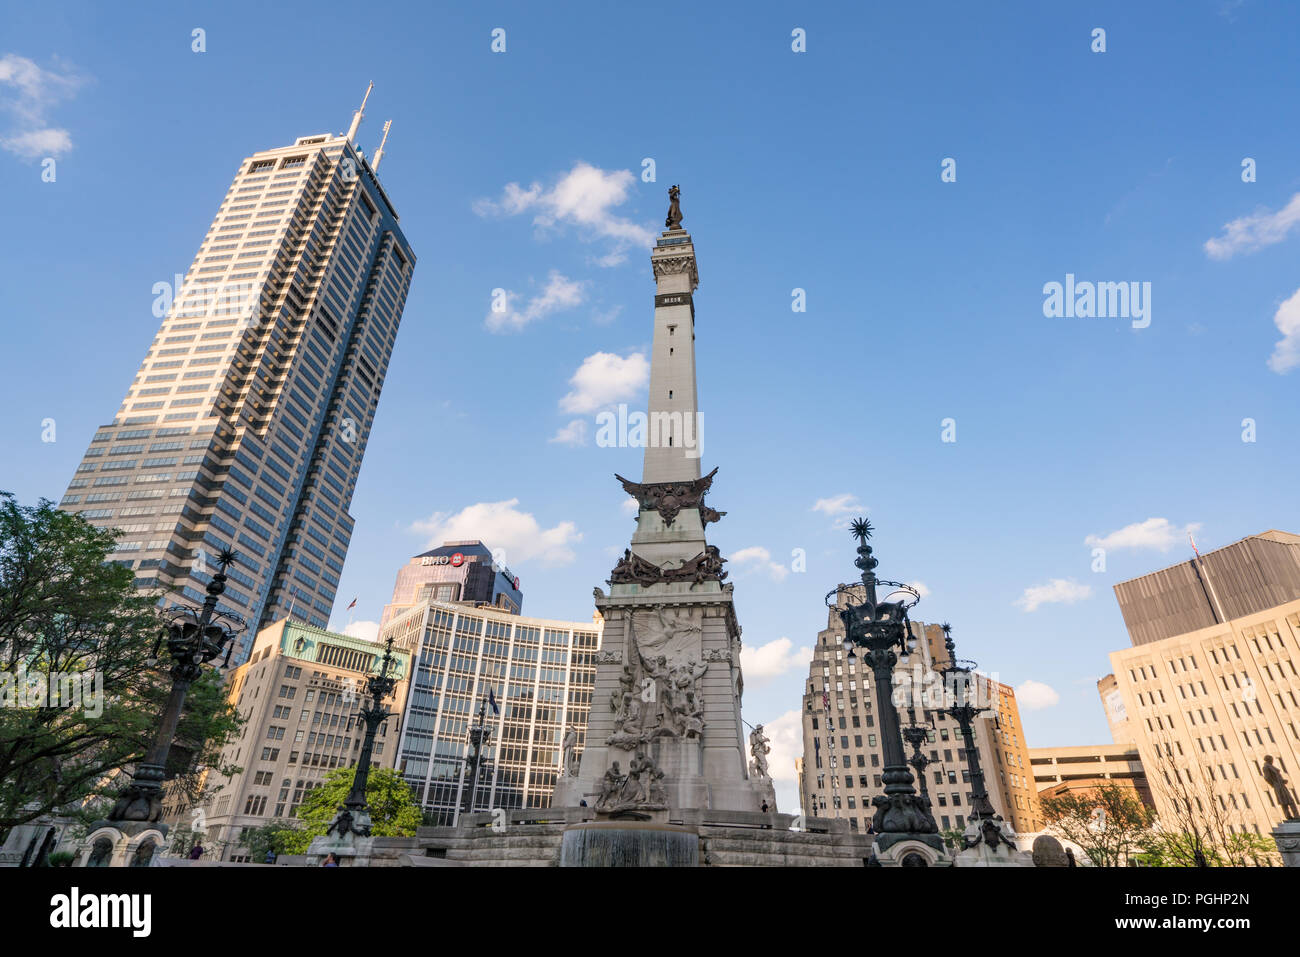 INDIANAPOLIS, IN - JUNE 18, 2018: Soldiers and Sailors Monument located in the Monument Circle Historic District of Indianapolis, Indiana Stock Photo